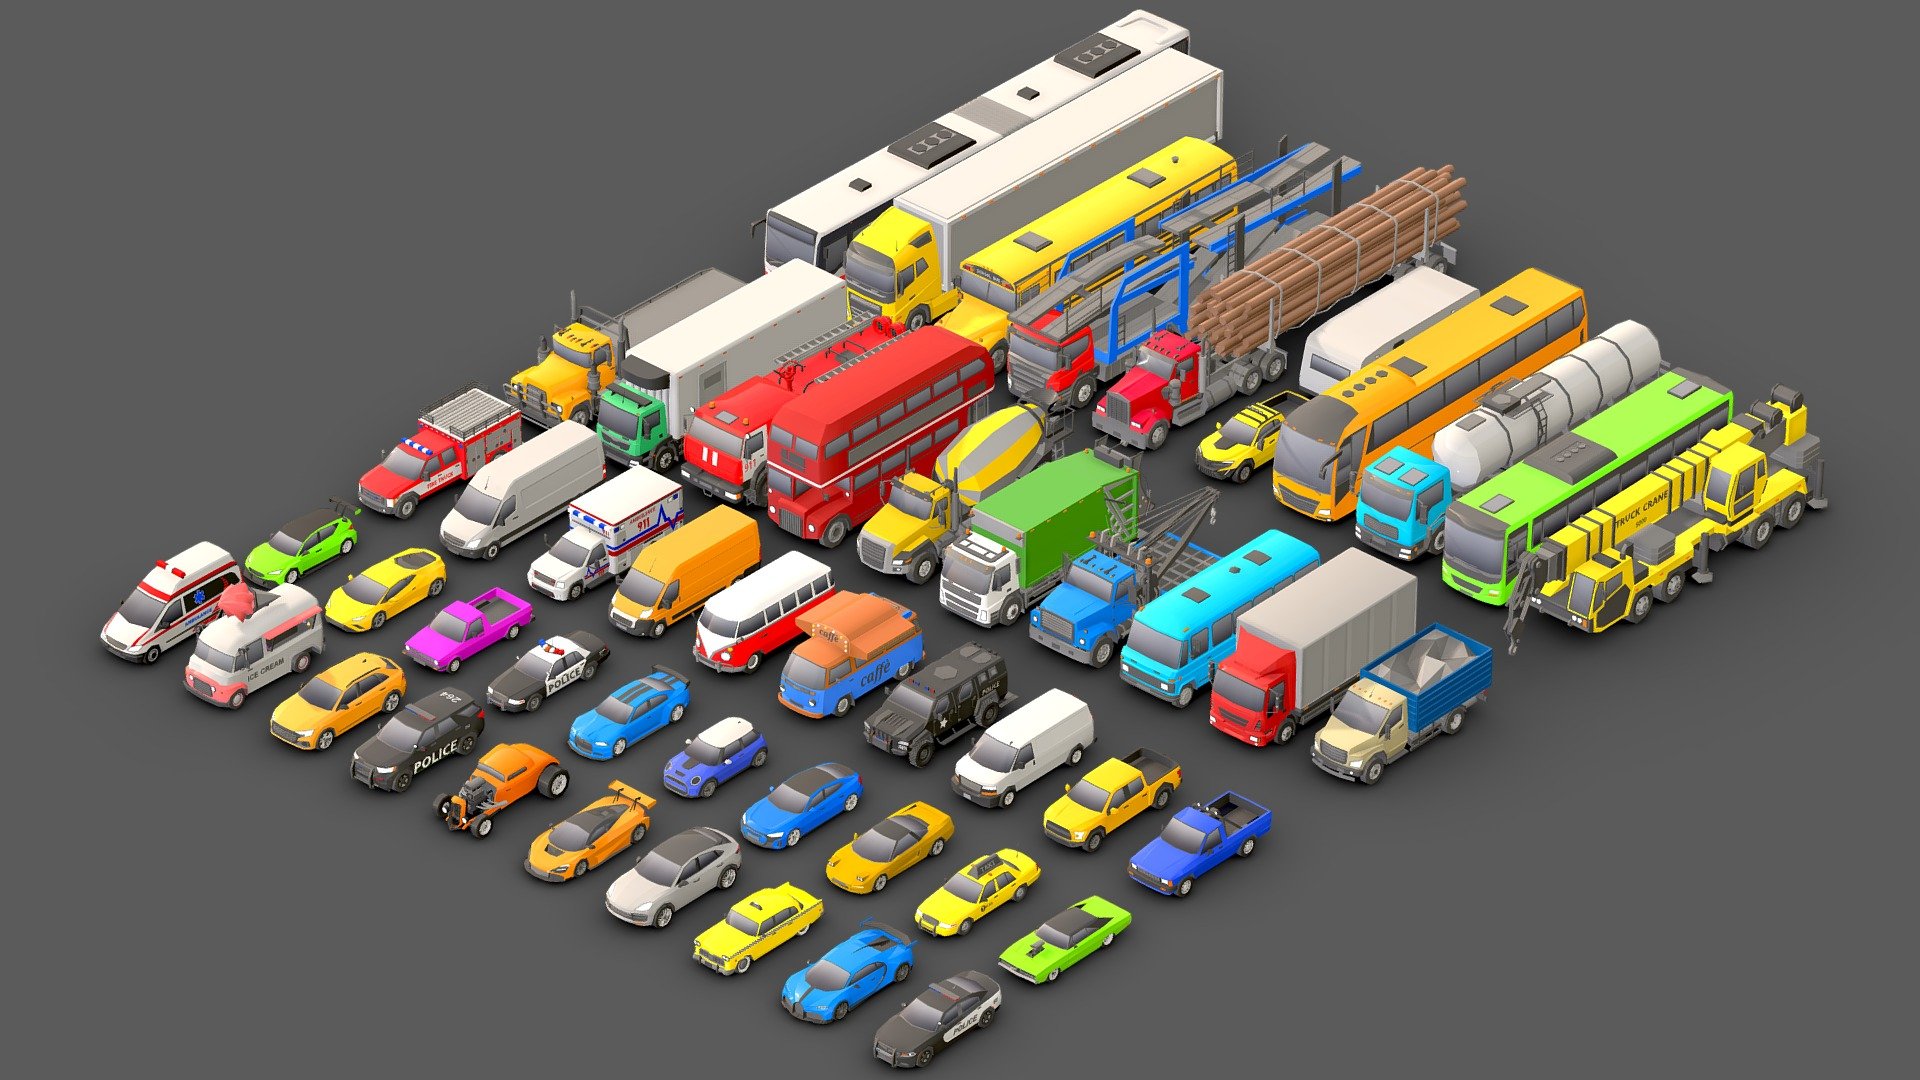 Vehicle Pack  Low- Poly 50.

You can use these models in any game and project.

This package includes 50 Models .

This model is made with order and precision.

The color of the body can be changed.

Separated parts (body. wheel . Trailers ).

Very low poly.

2000 - 8000 triangles per Models.

Texture size: 256 (PNG).

Number of textures: 1.

Number of materials: 1.

format: fbx, obj, 3d max - Vehicle Pack  Low- Poly 50 - Buy Royalty Free 3D model by Sidra (@Sidramax) 3d model